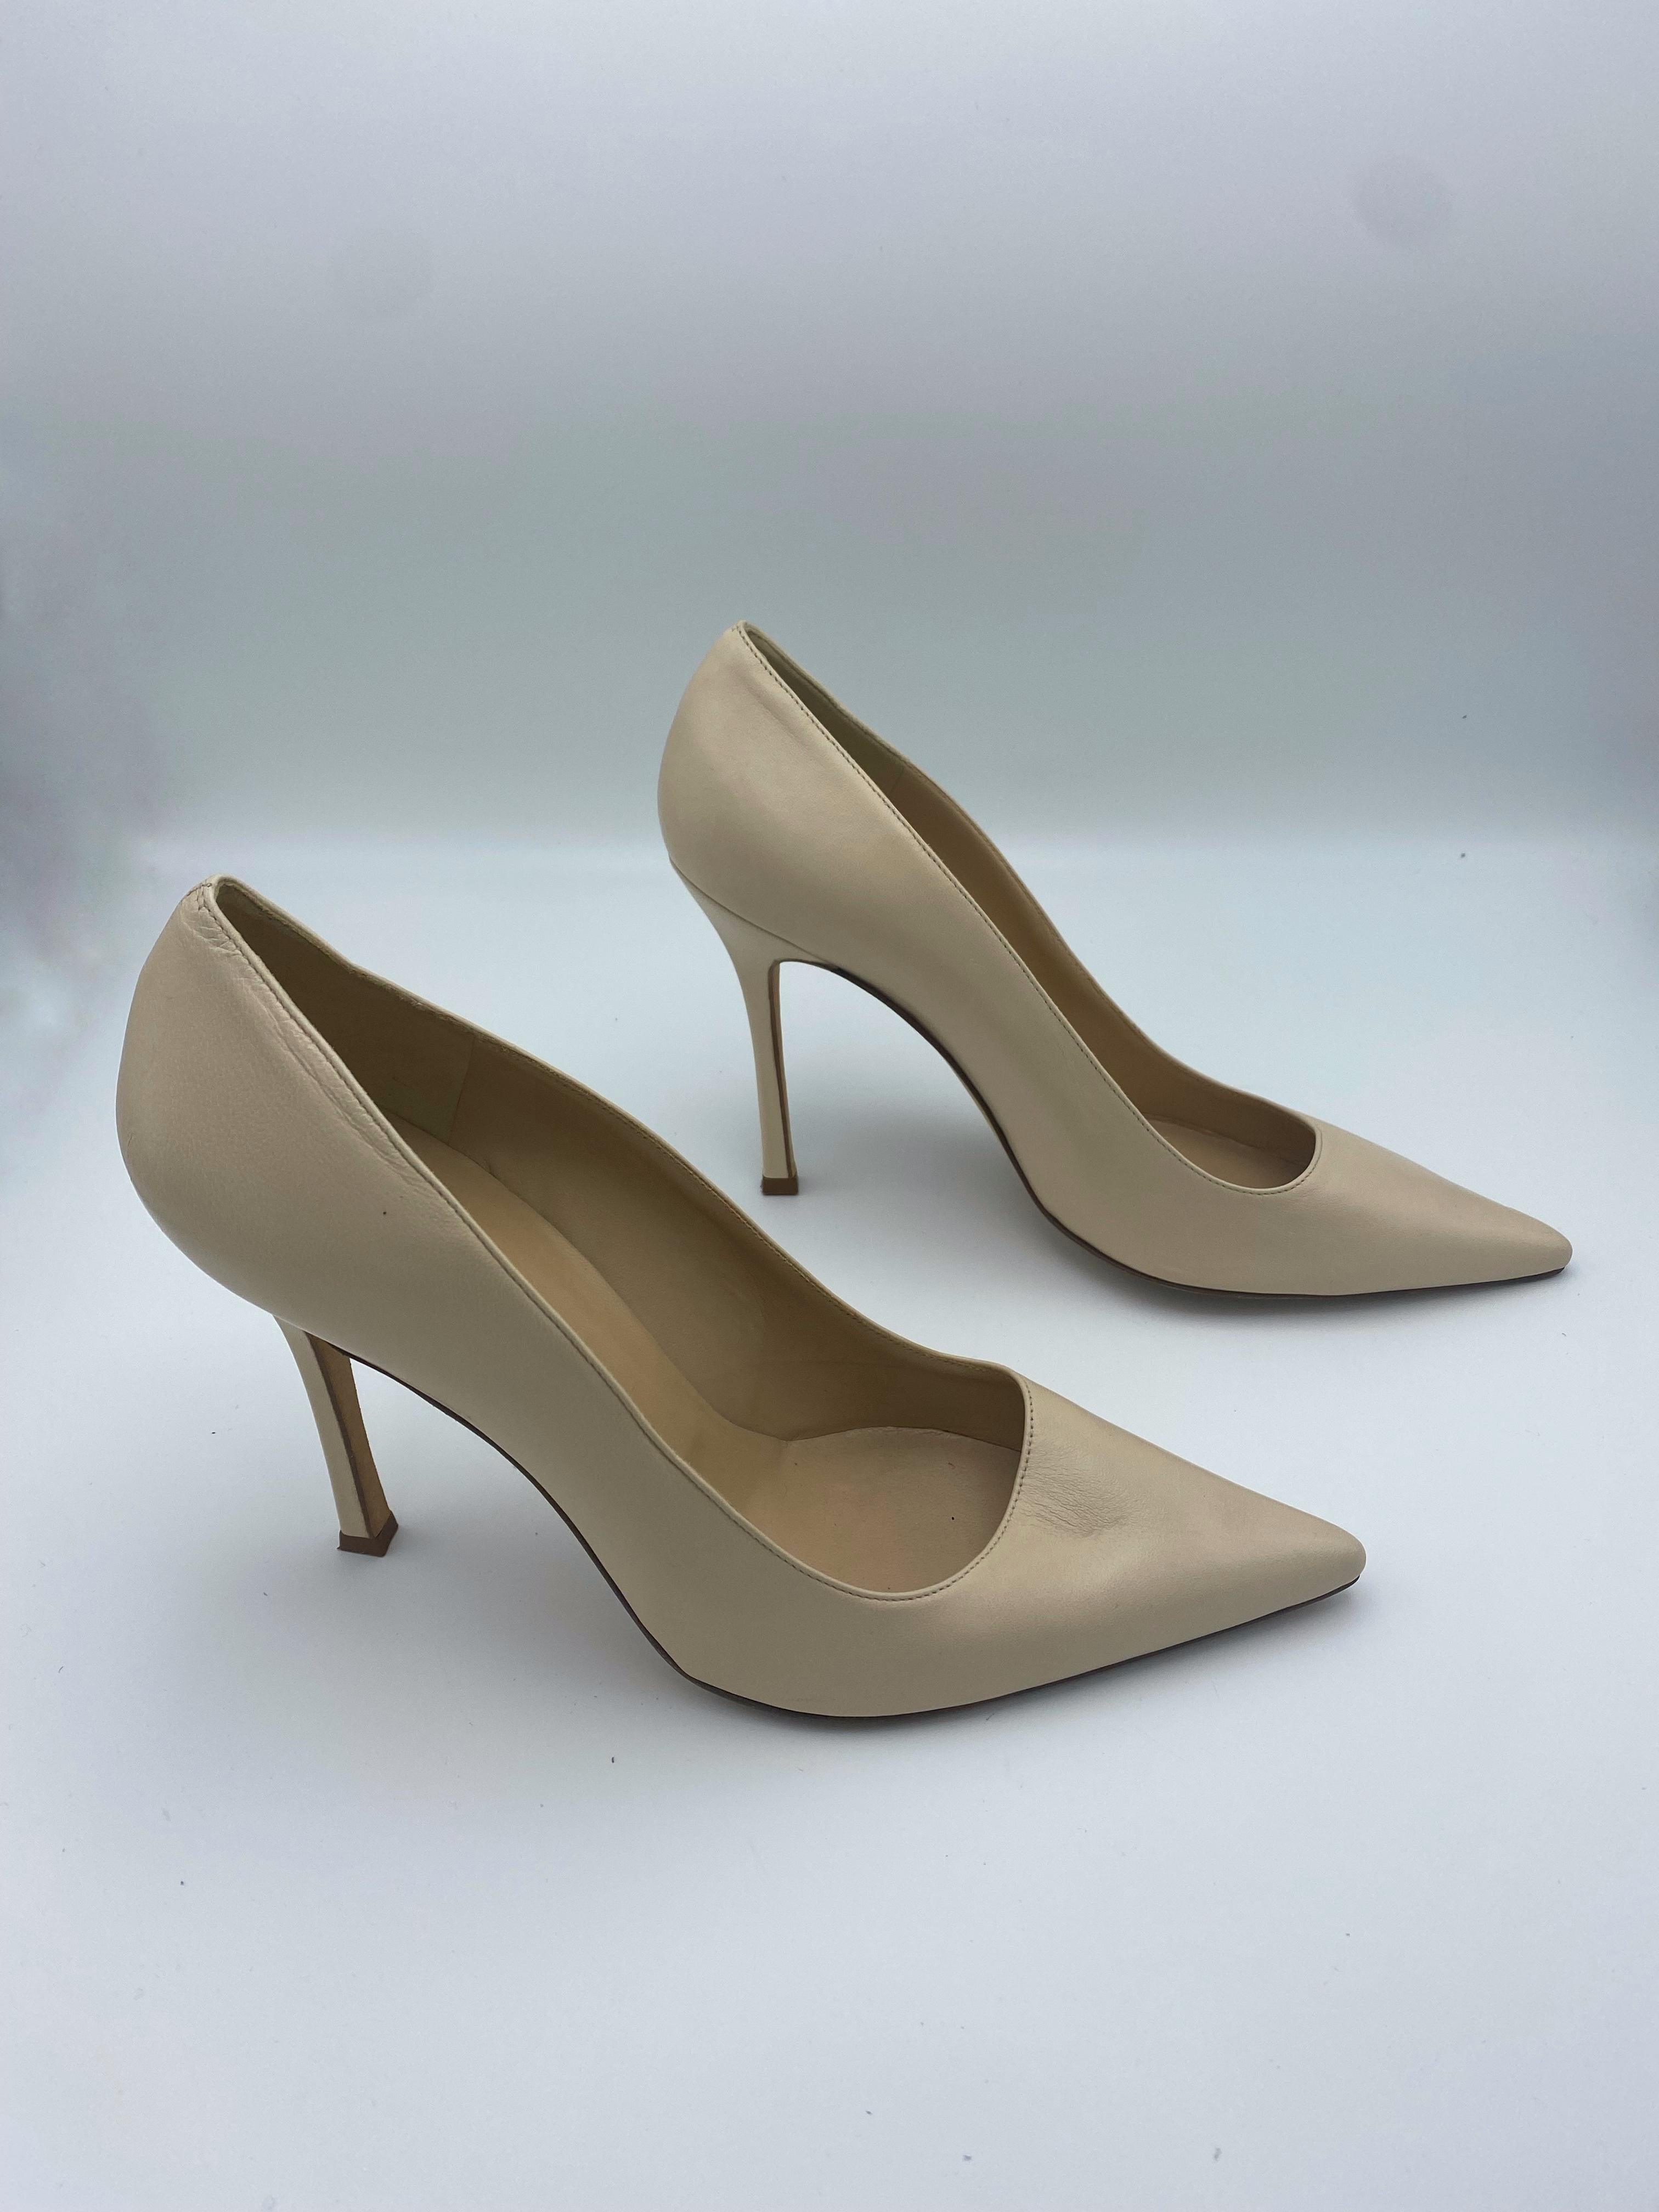 Product details:

The pumps feature skinny heel and pointy toe design.